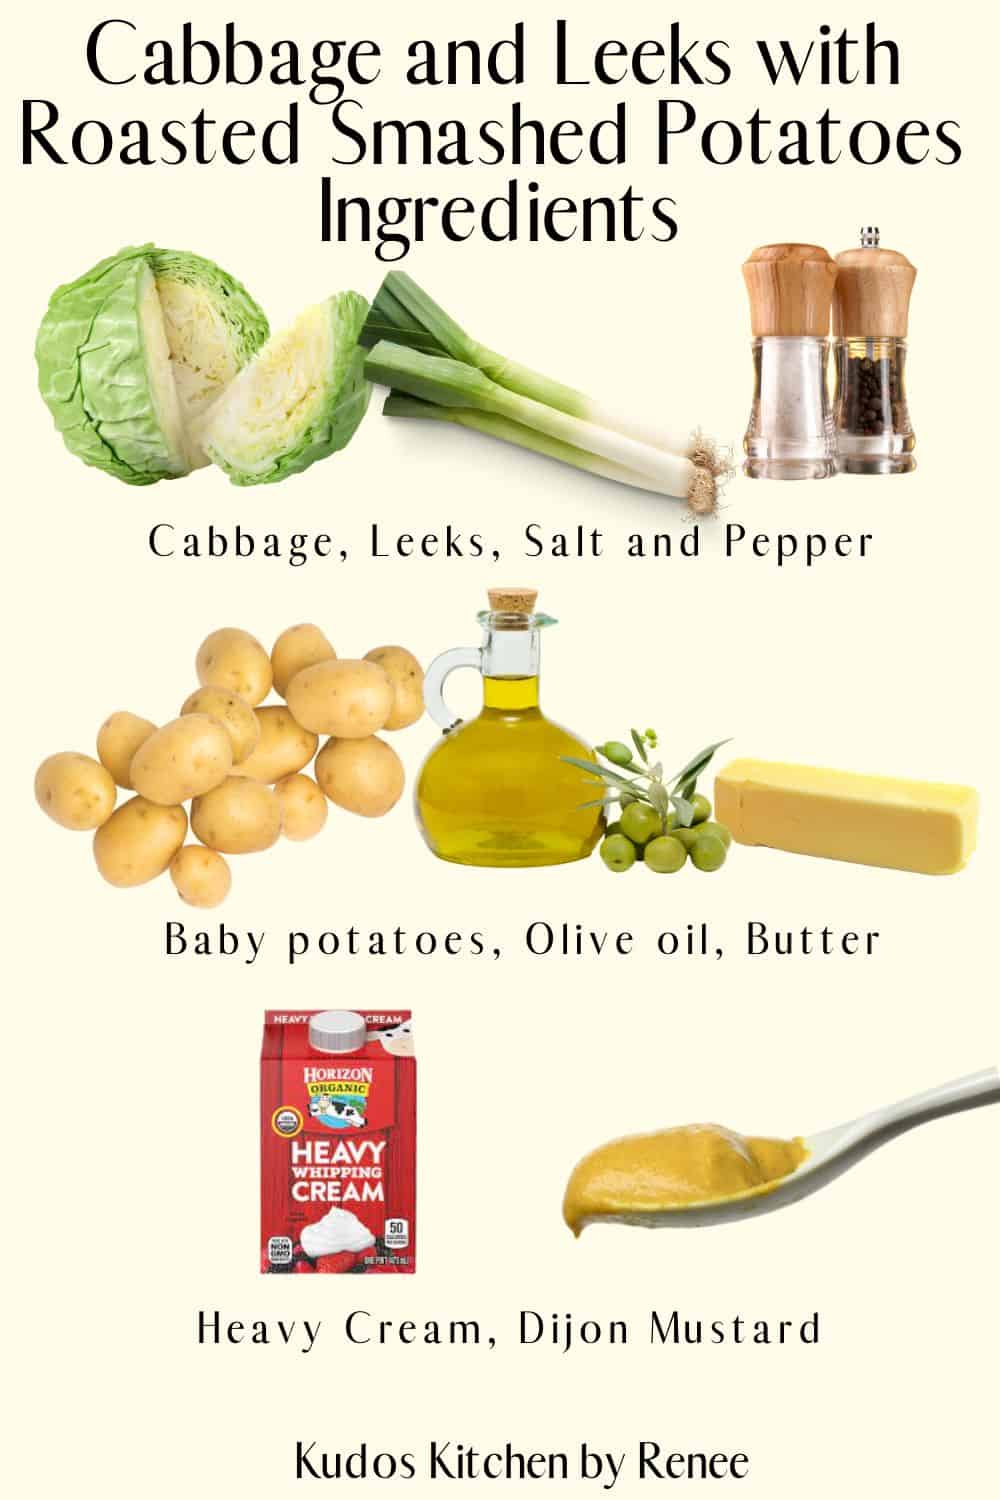 A visual ingredient list for making Fried Cabbage and Leeks with Roasted Smashed Potatoes for St. Patrick's Day.